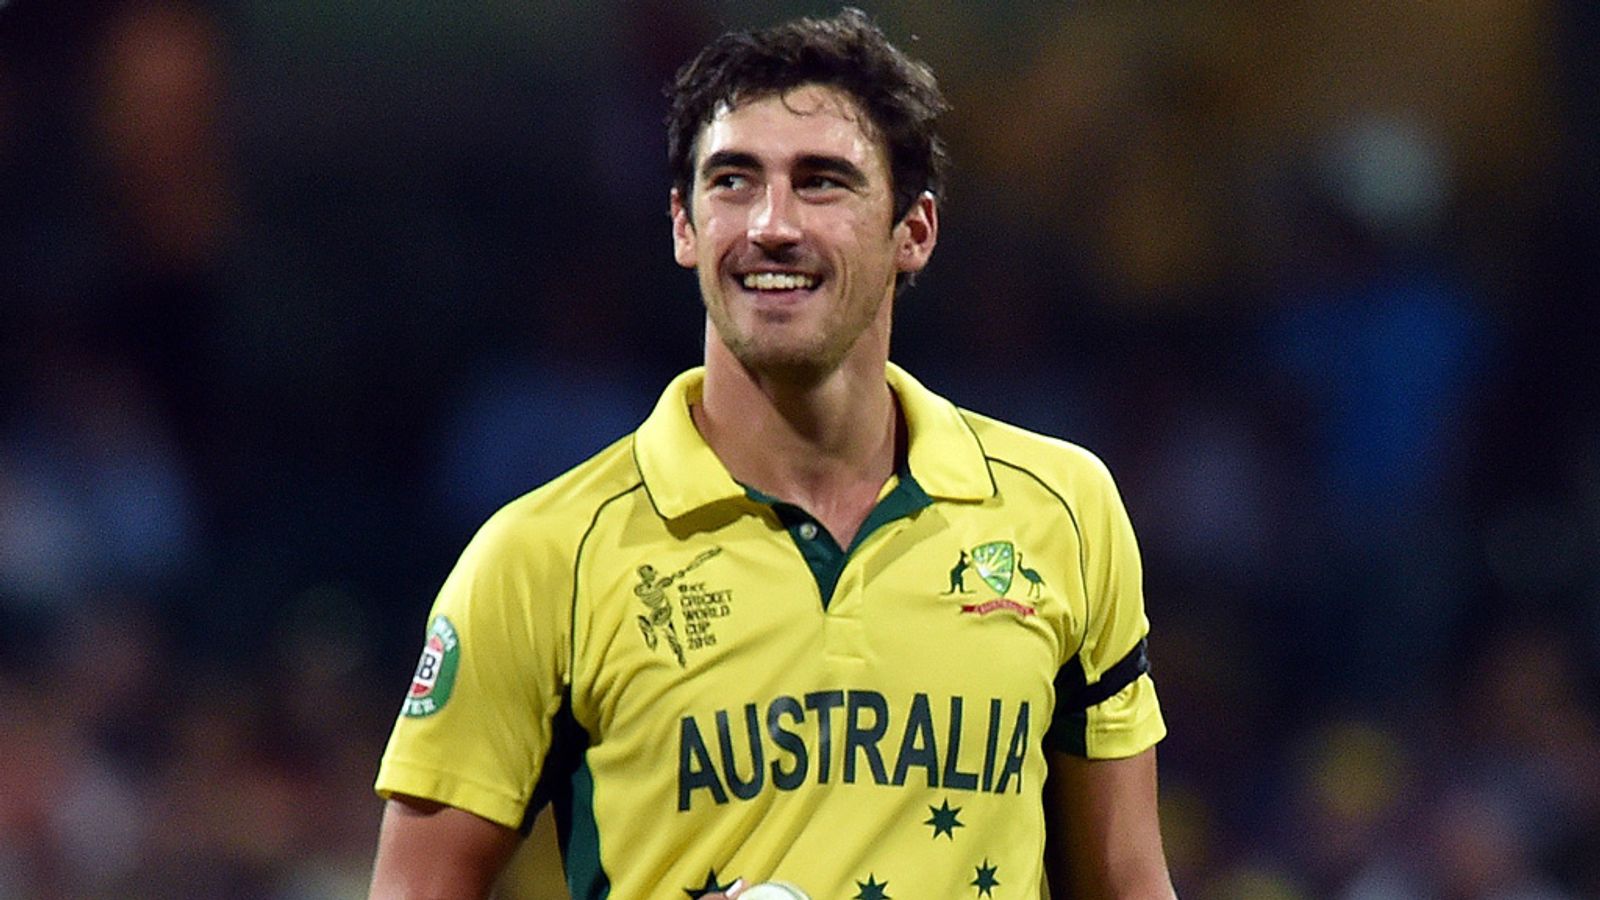 Smith and Starc sizzle in damp squib